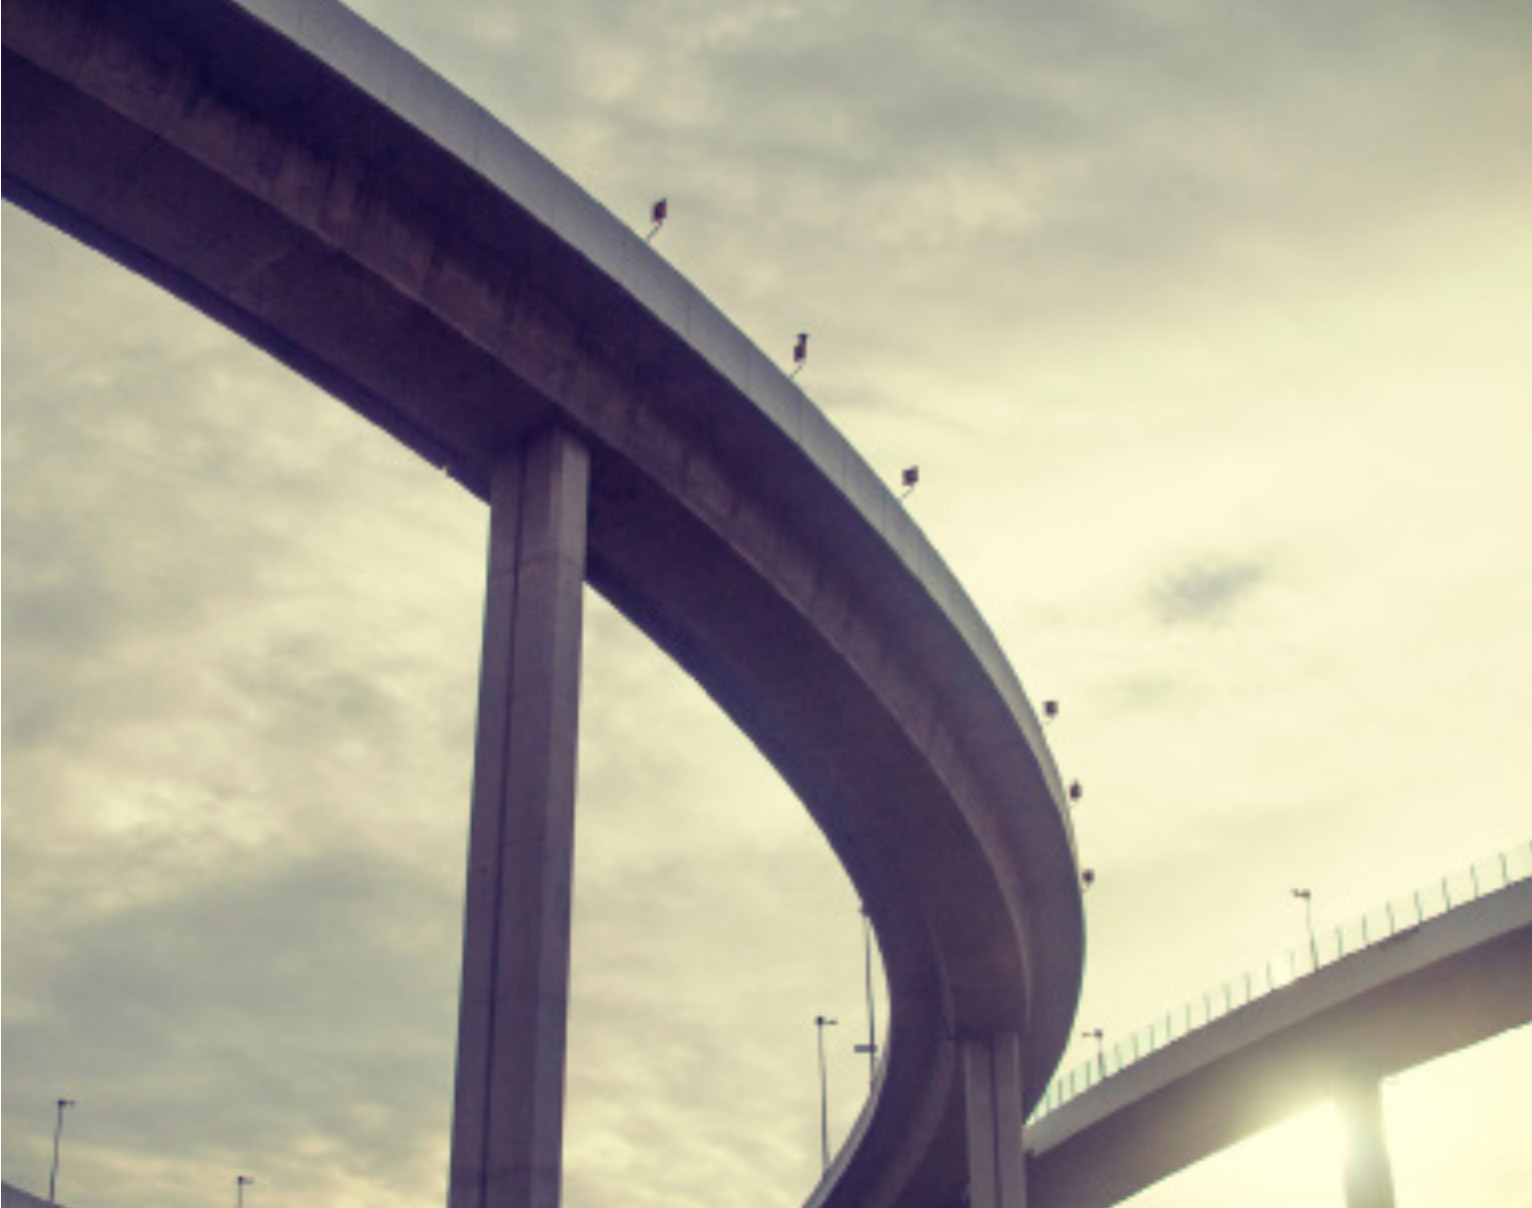 The Off-Ramp: Why Comprehensive Exit Planning Is So Important